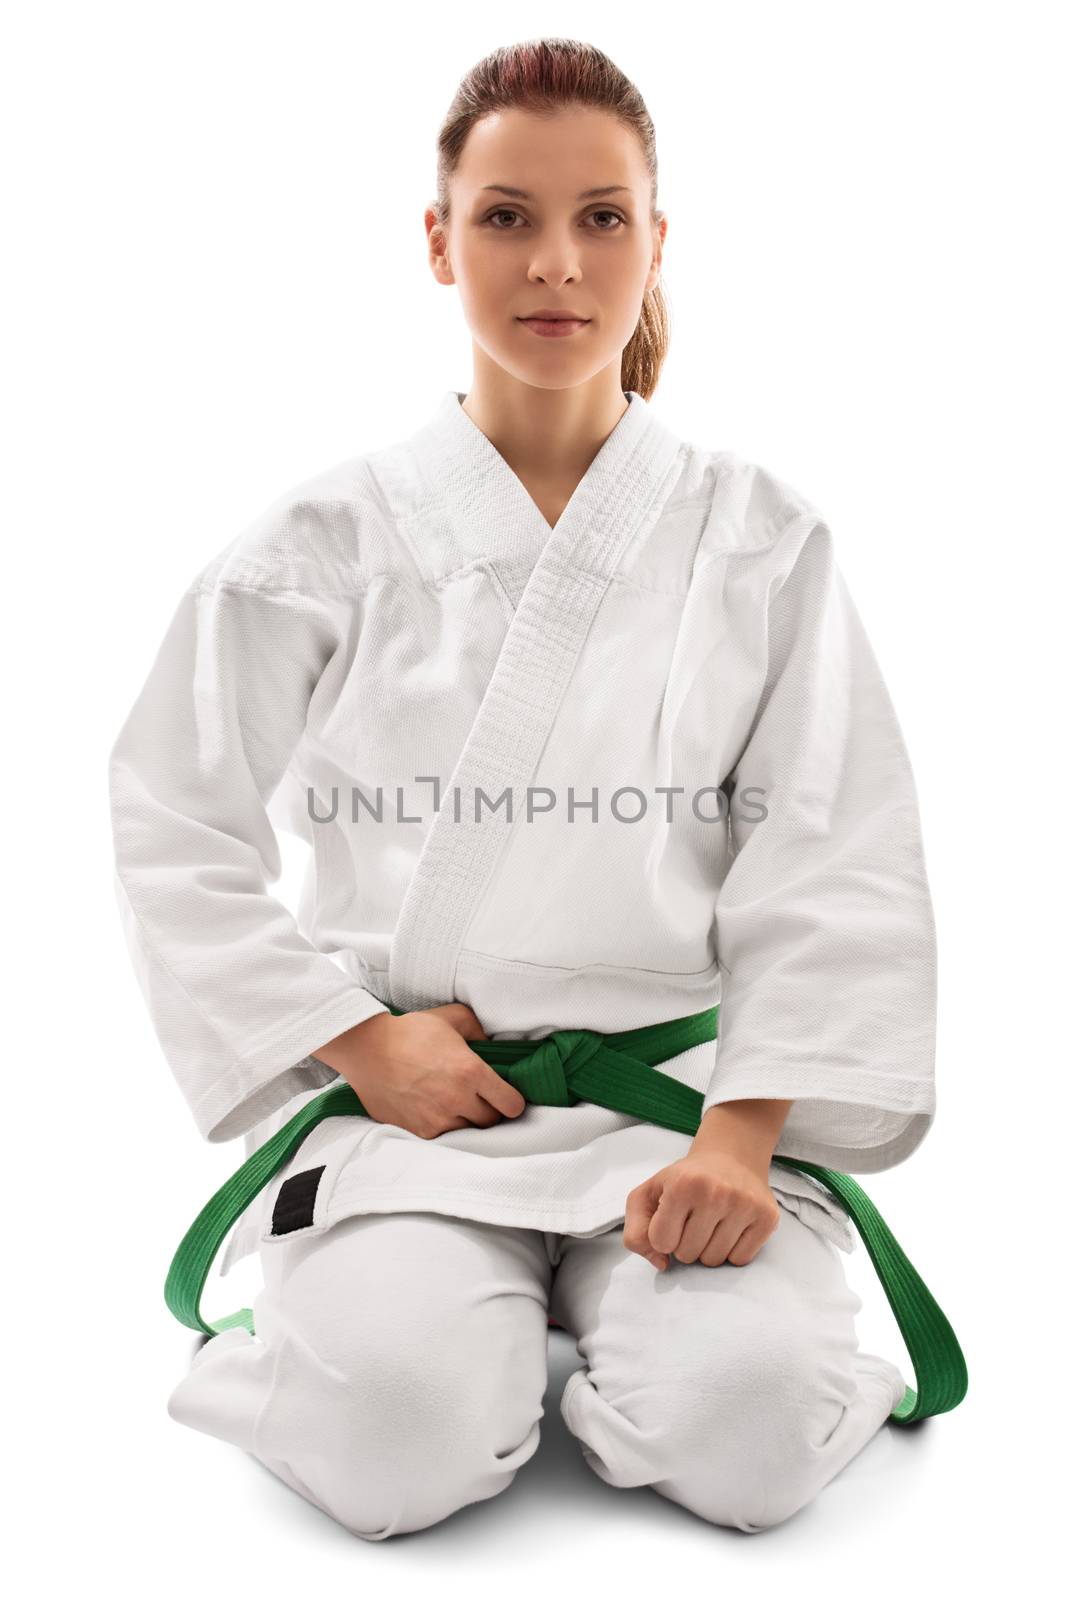 Portrait of a beautiful female martial arts fighter in a white kimono with green belt in the seiza position, isolated on white background. Calm young girl in a kimono kneeling down.